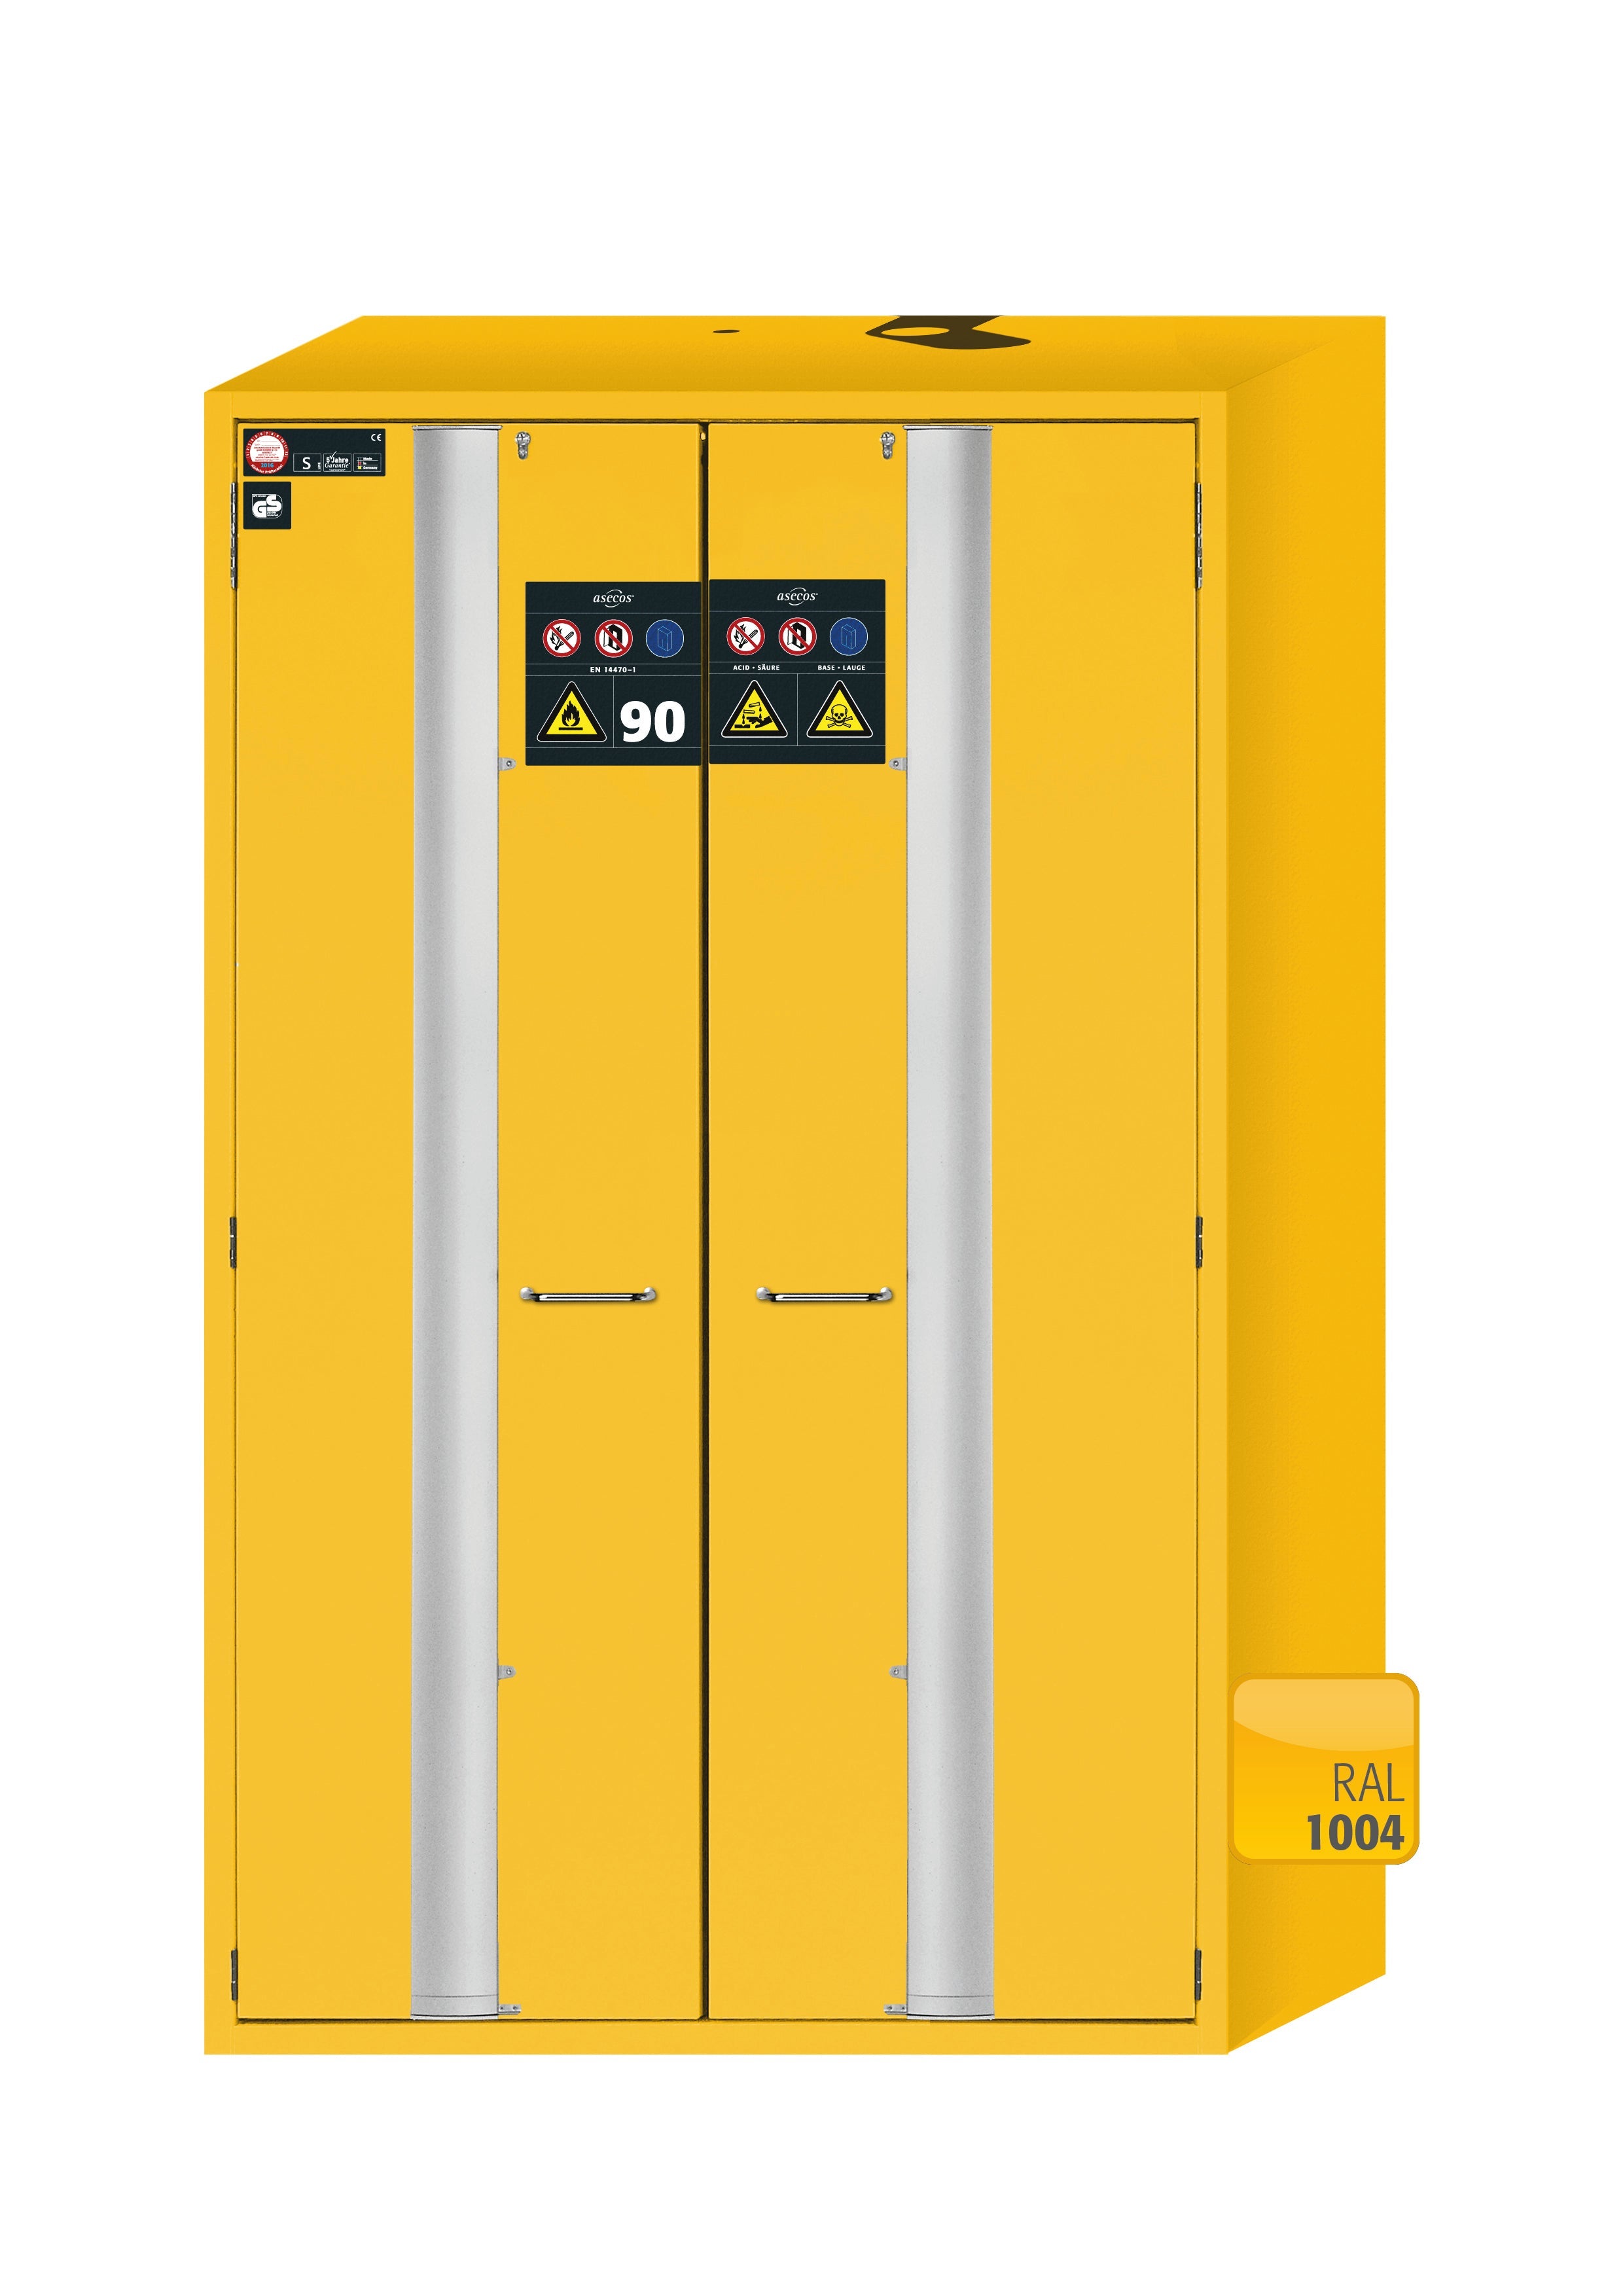 Type 90 safety cabinet S-PHOENIX-90 model S90.196.120.MV.FDAS in safety yellow RAL 1004 with 4x standard pull-out tray (stainless steel 1.4301)